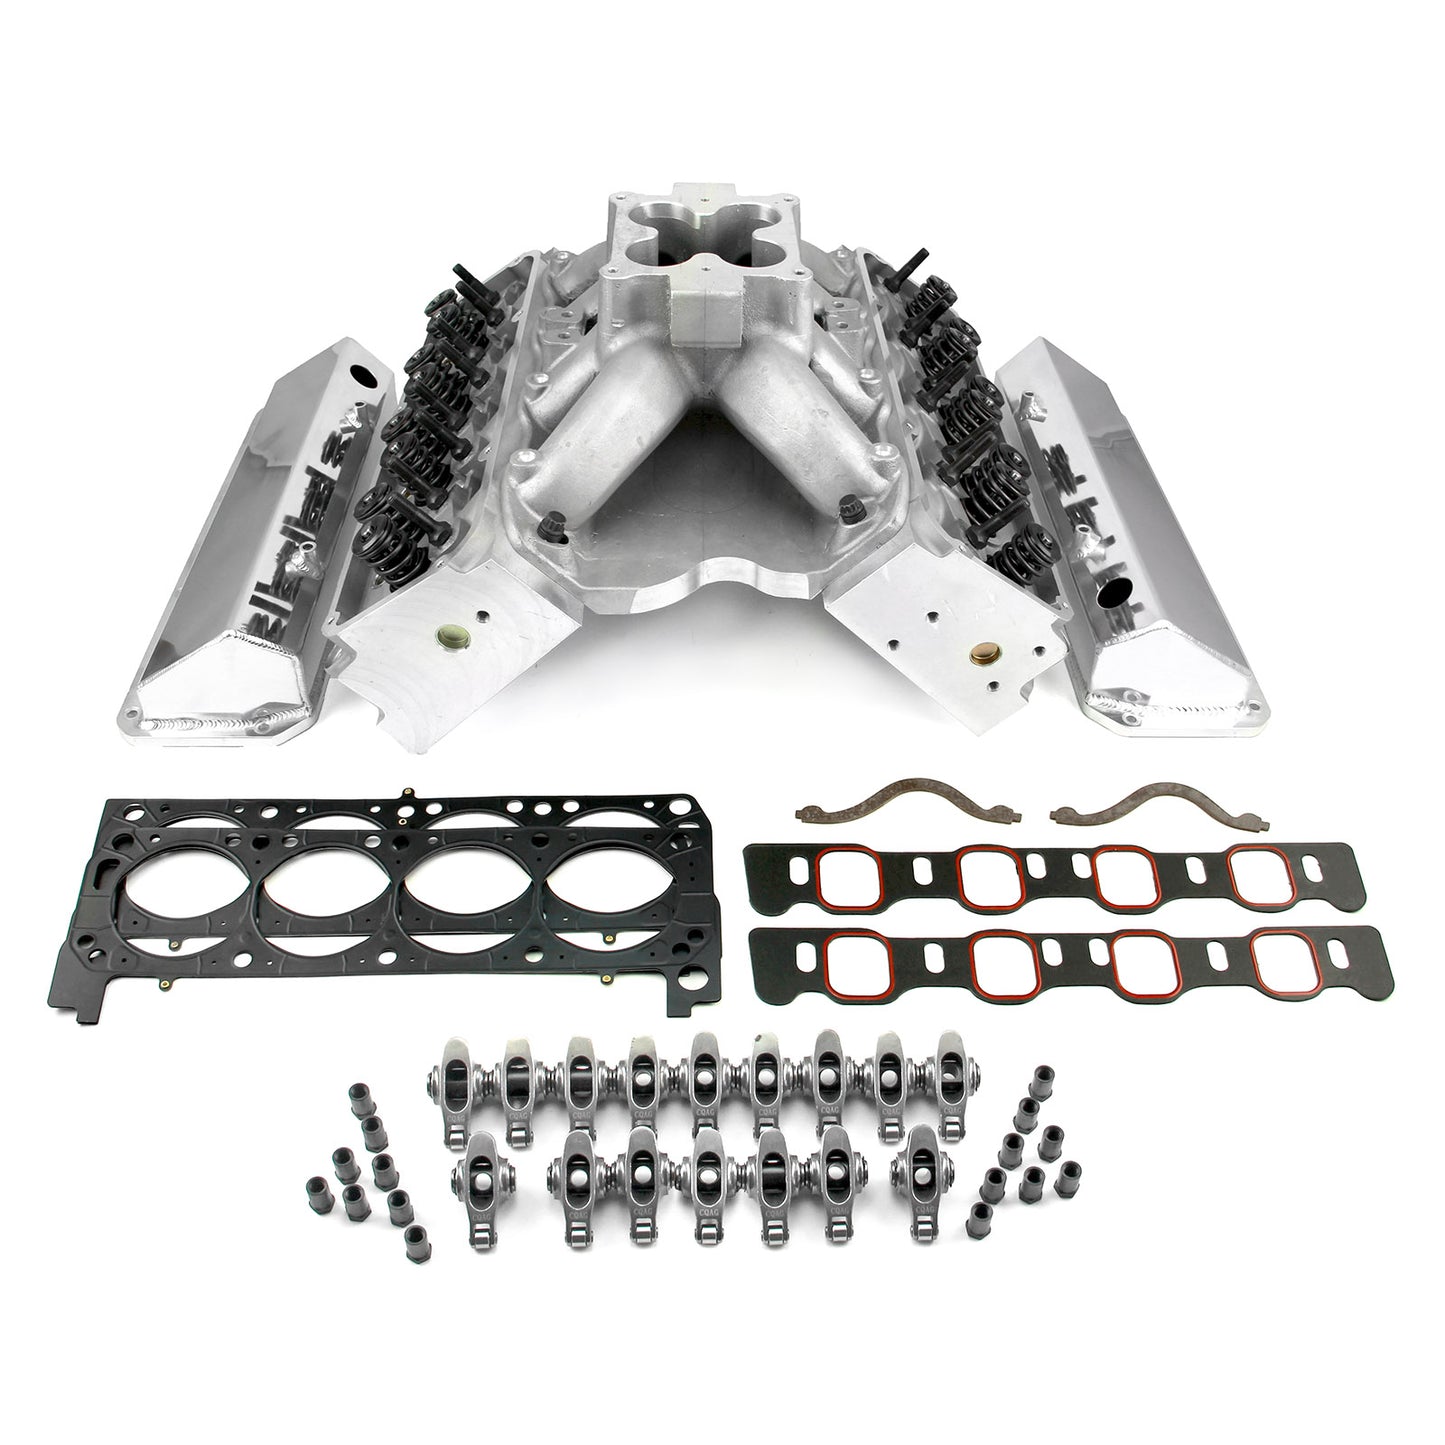 Speedmaster PCE435.1058 Fits Ford 351C 9.2 Deck Fusion Manifold Hyd FT Cylinder Head Top End Engine Combo Kit